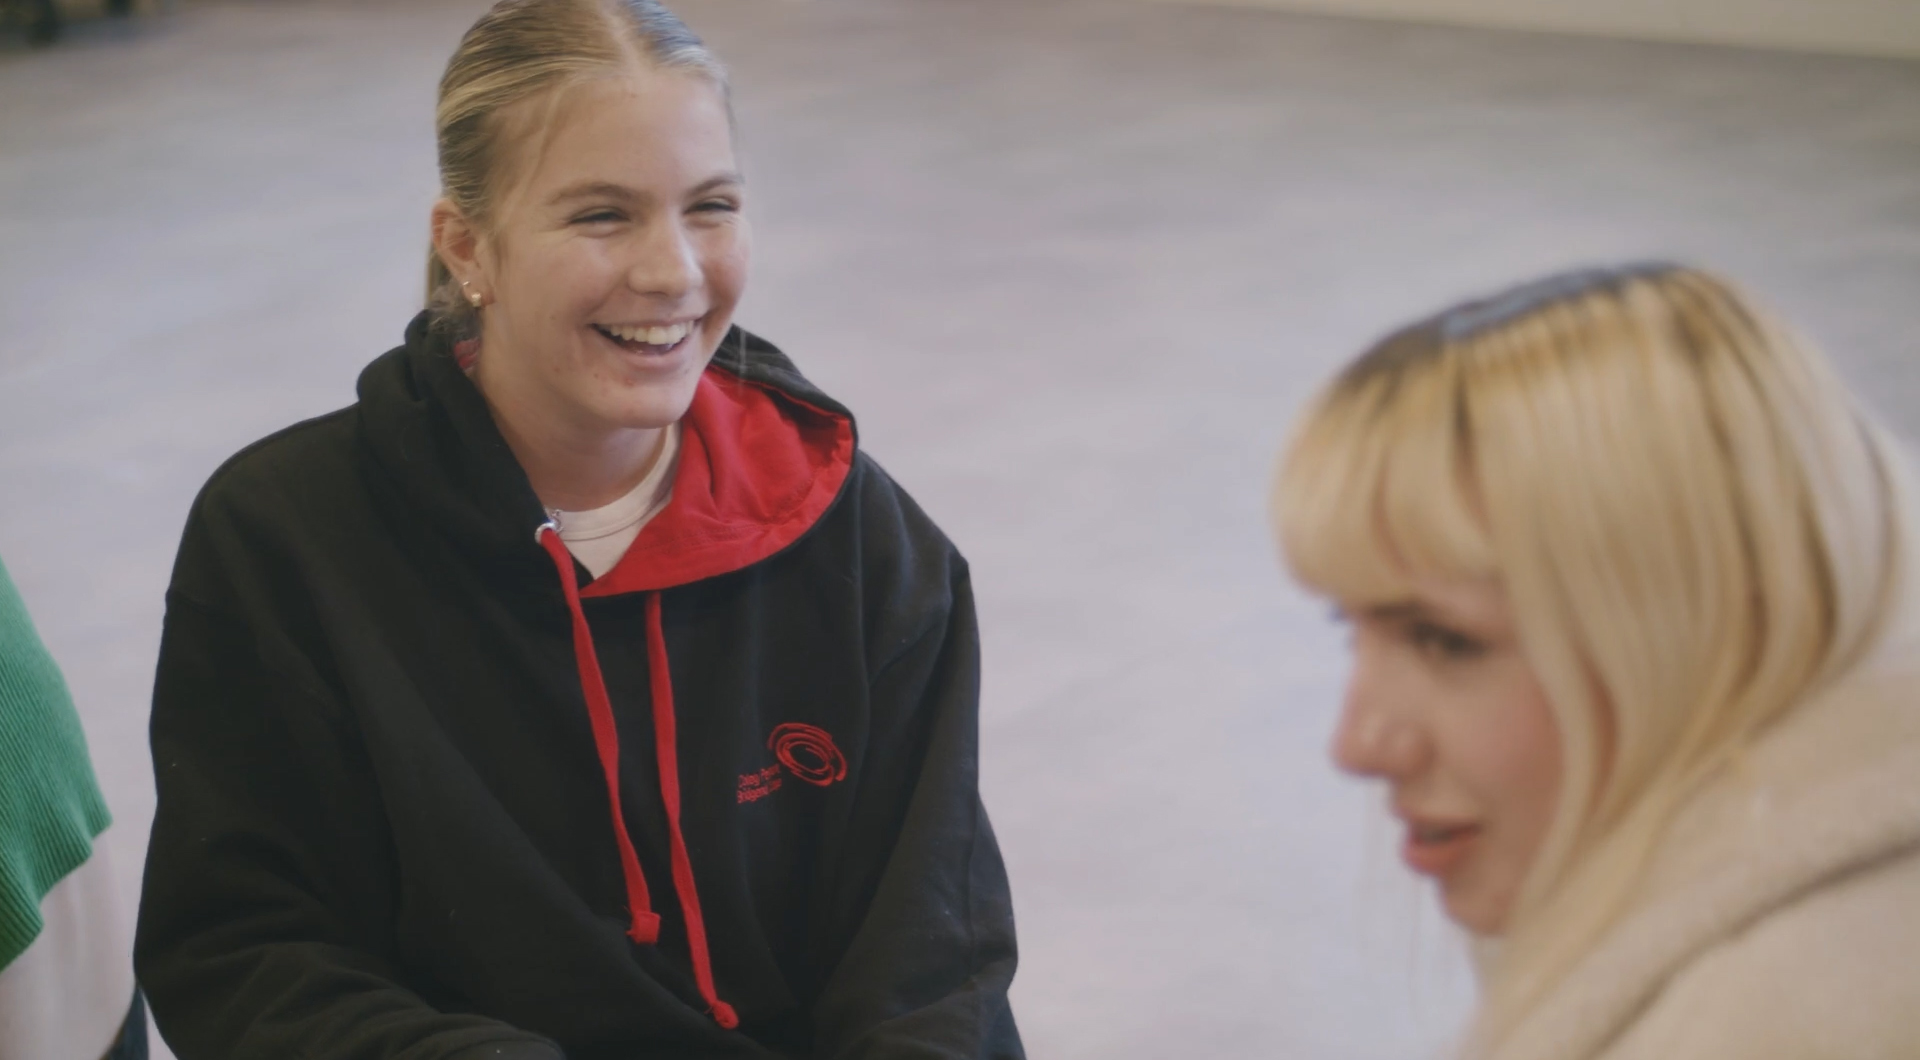 Two young white blonde women are sat on the floor having a discussion. One is smiling widely, and the other appears mid sentence.